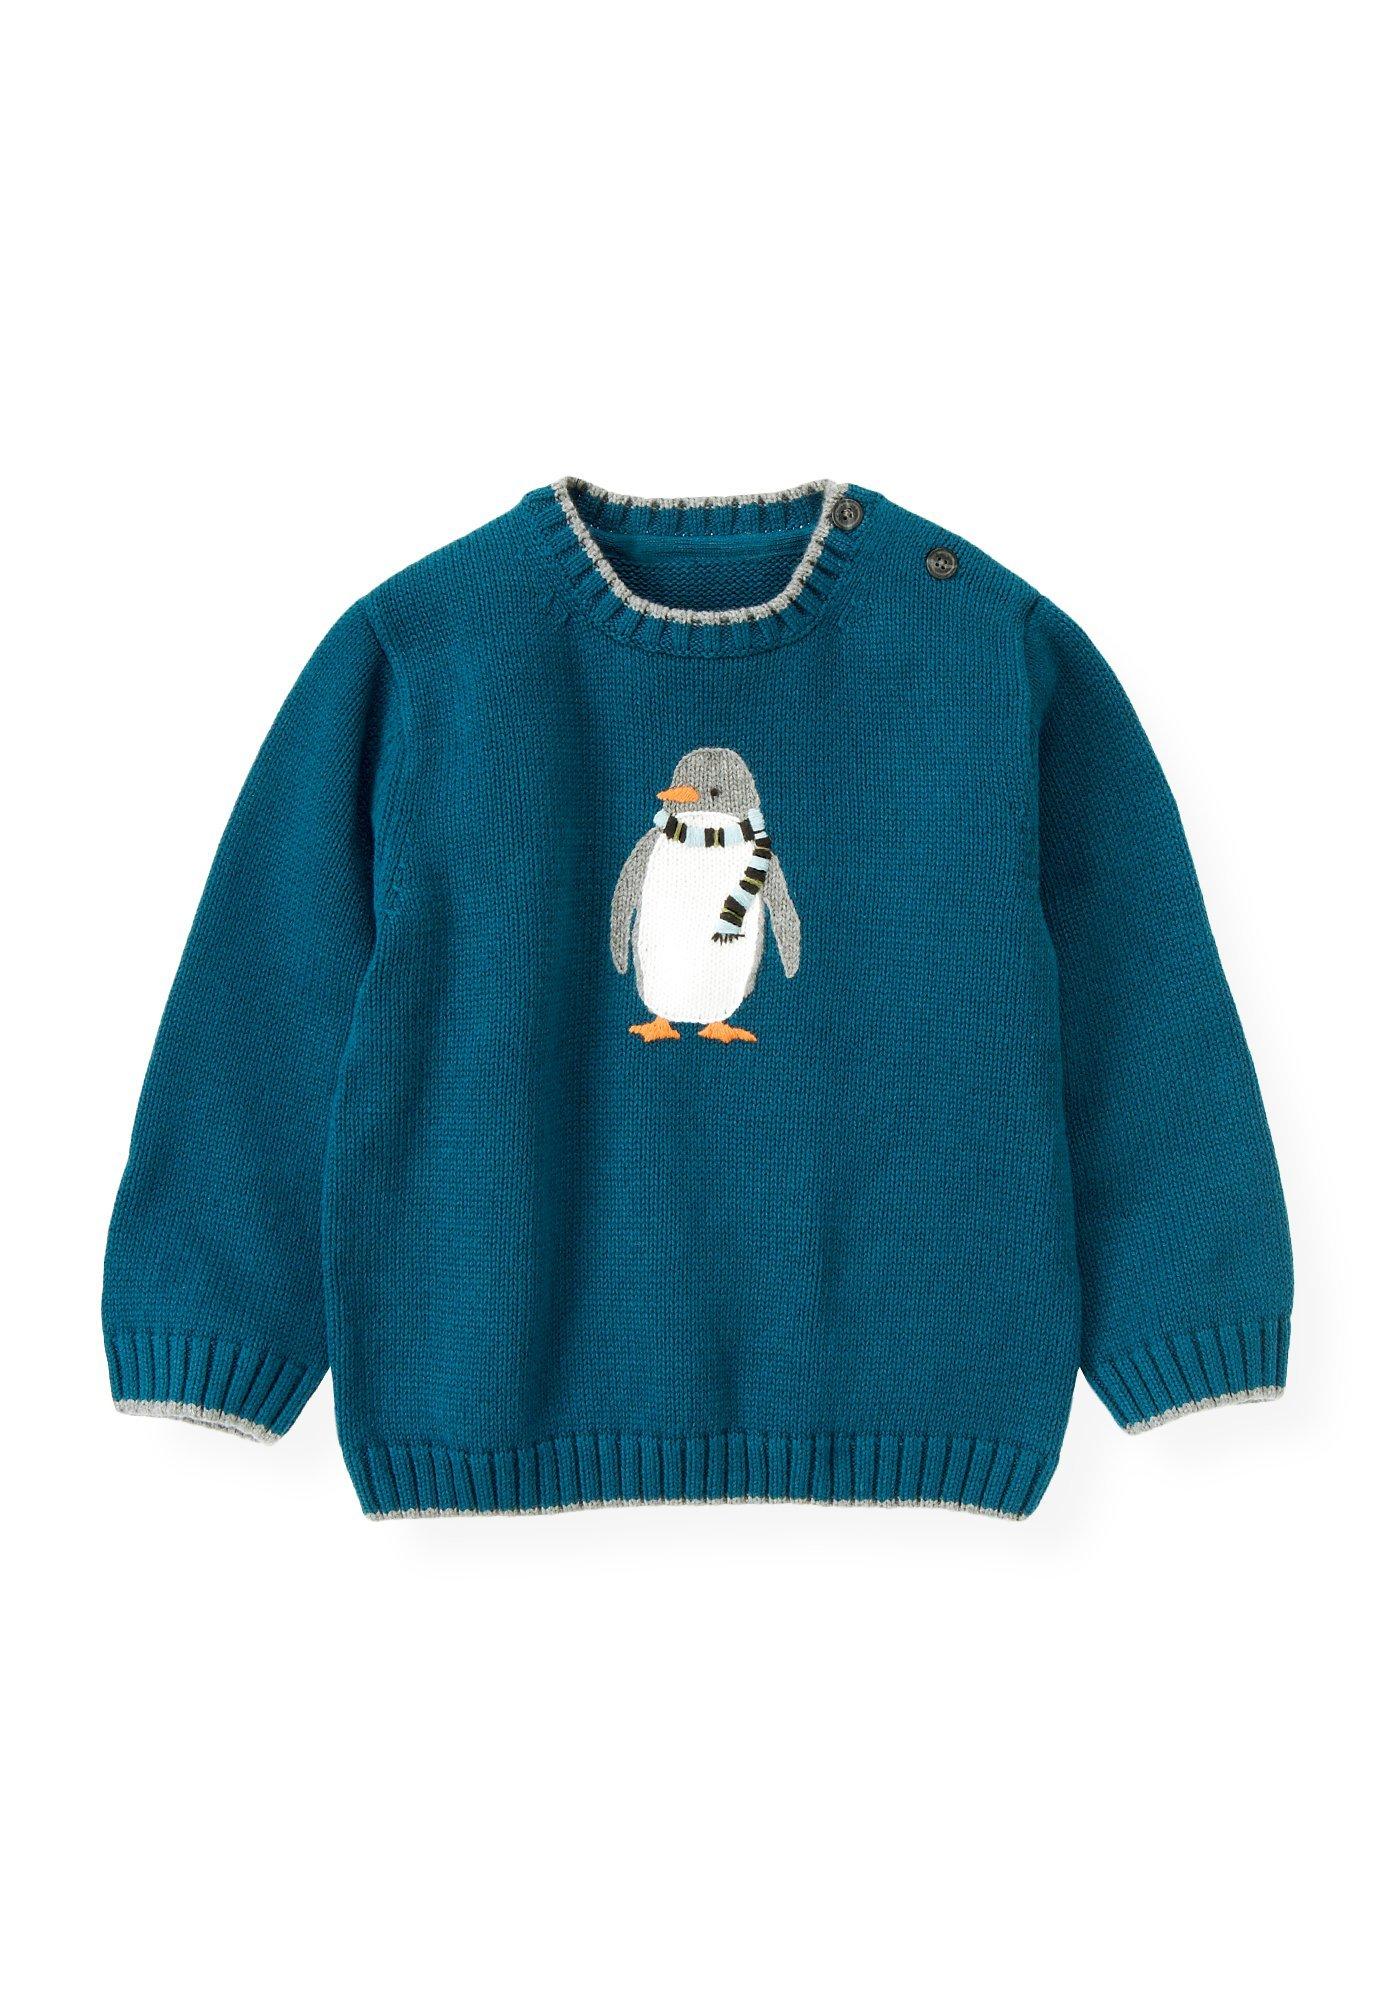 Penguin Sweater image number 0